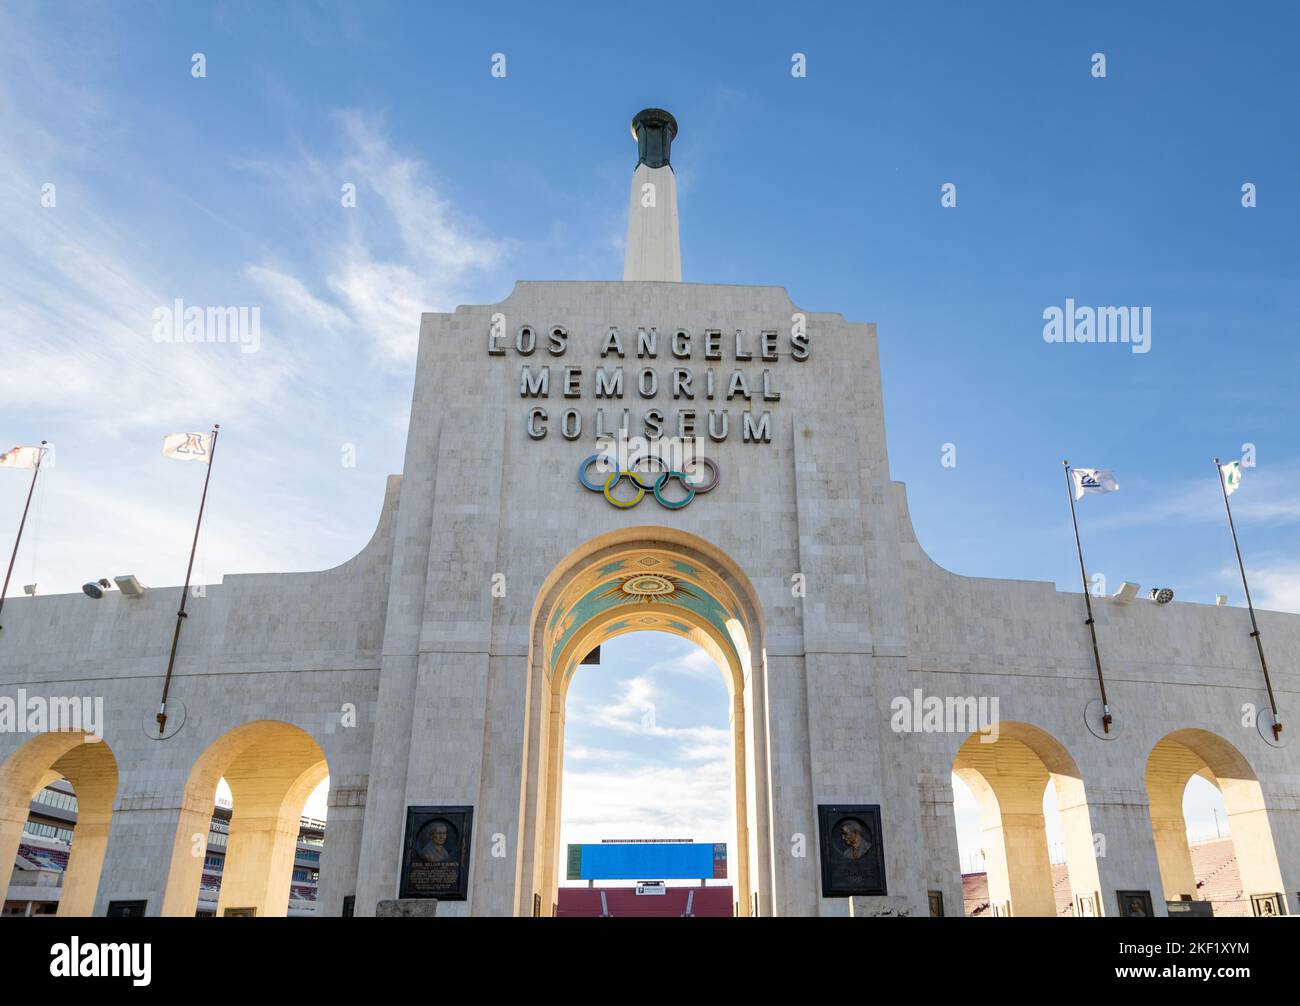 Los Angeles, CA - November 2022: Los Angeles Memorial Coliseum, home to USC football, Olympics and other events. Stock Photo